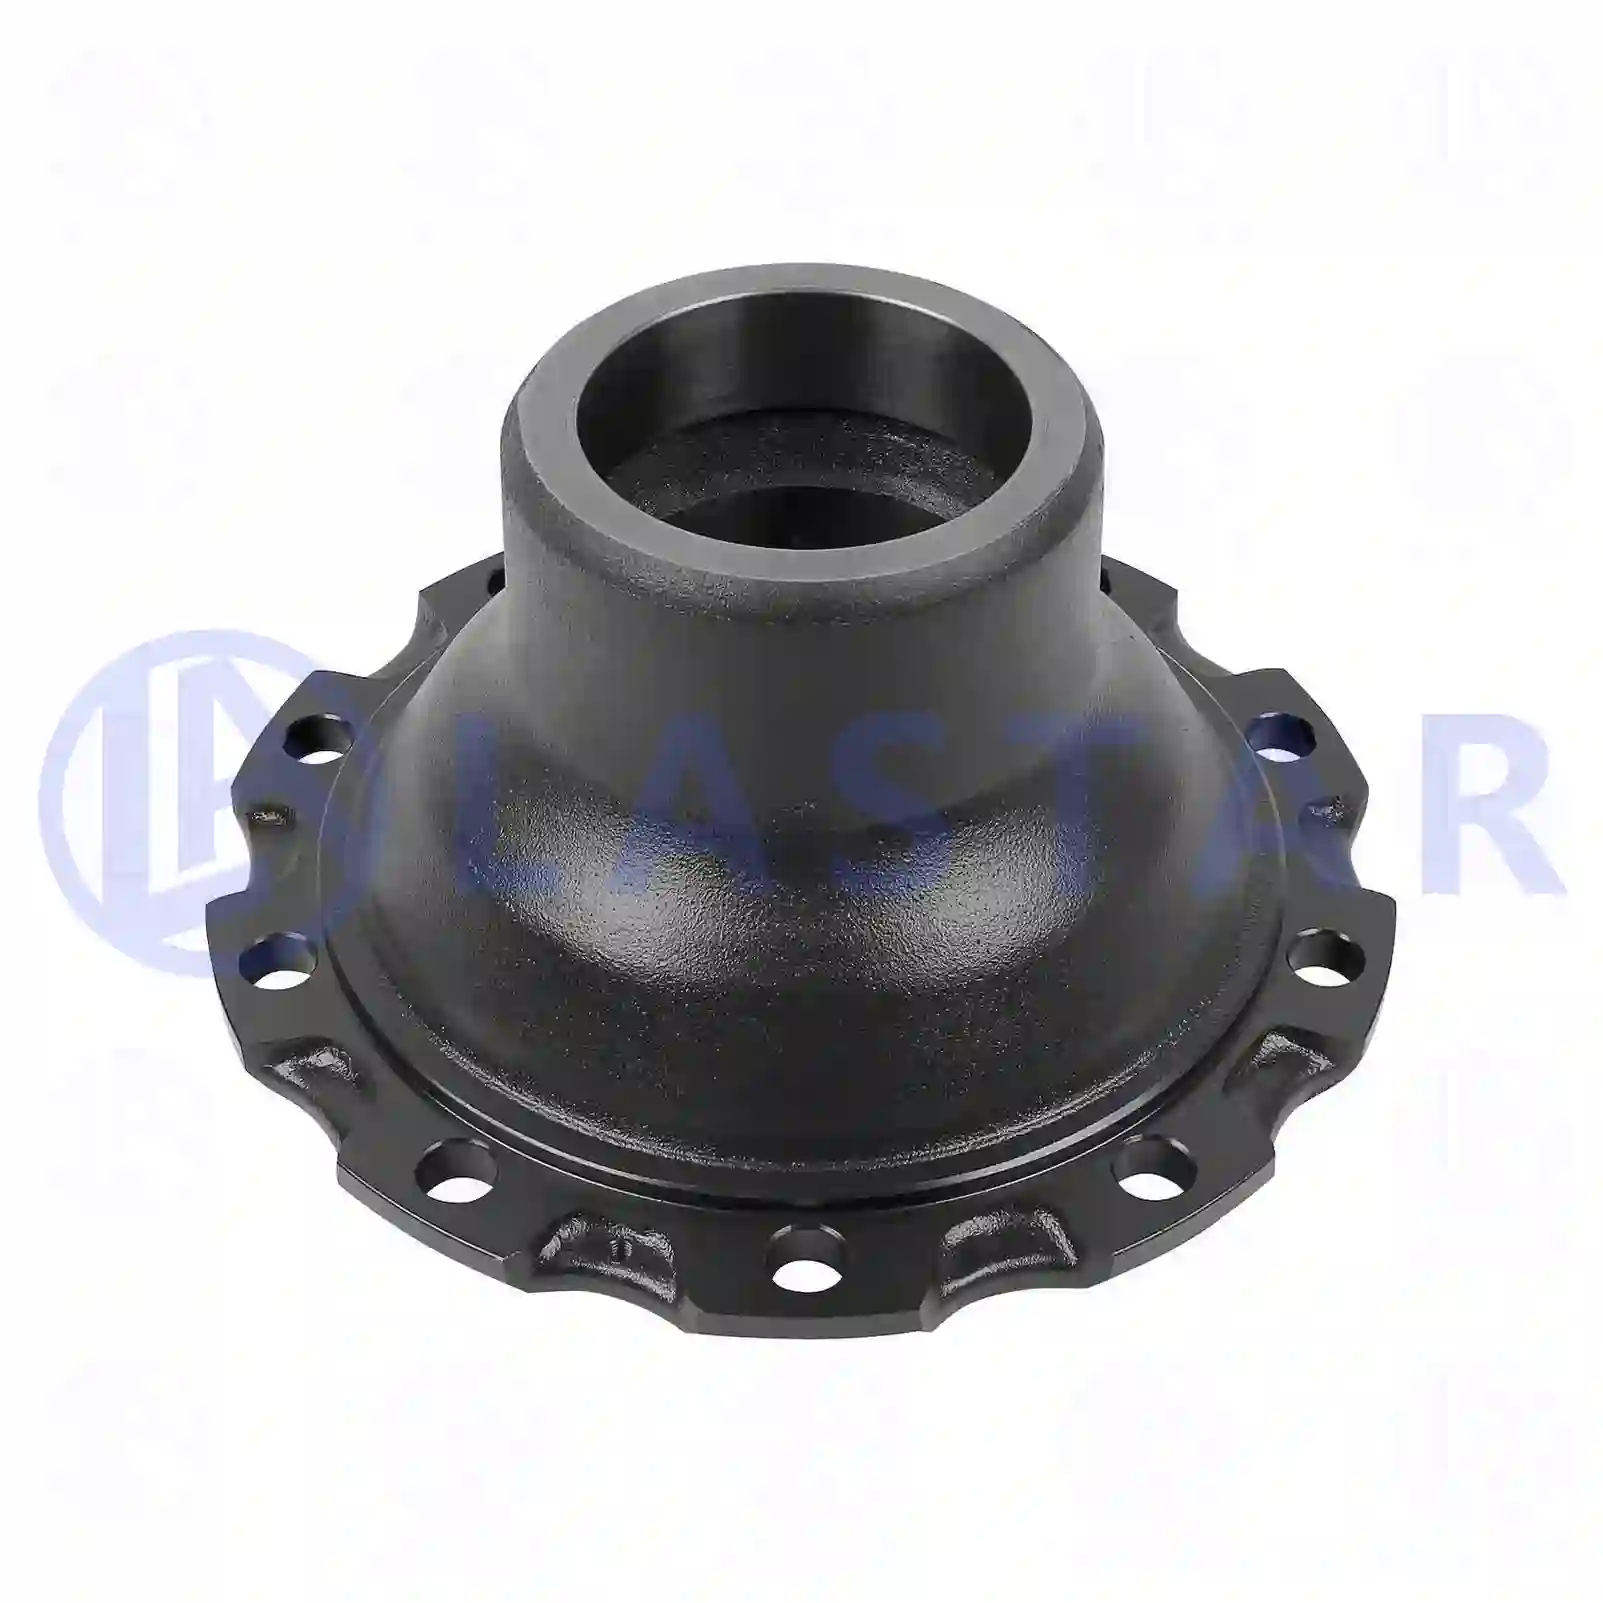 Wheel hub, without bearings, 77726832, 1414154, 1724407, 1868674, ZG30221-0008, , ||  77726832 Lastar Spare Part | Truck Spare Parts, Auotomotive Spare Parts Wheel hub, without bearings, 77726832, 1414154, 1724407, 1868674, ZG30221-0008, , ||  77726832 Lastar Spare Part | Truck Spare Parts, Auotomotive Spare Parts